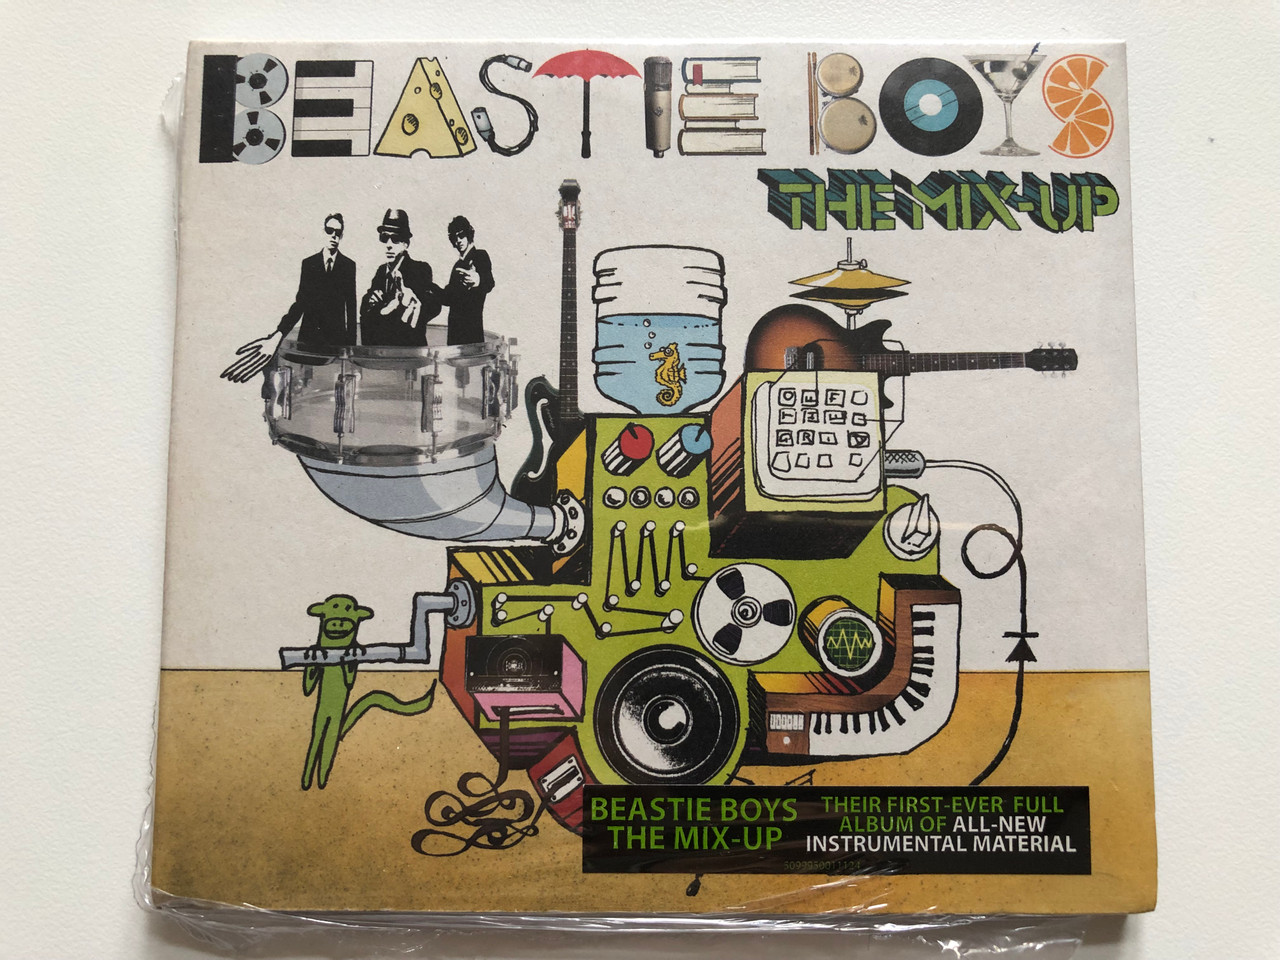 Beastie Boys – The Mix-Up / Their First-Ever Full Album Of All-New Instrumental Material / CD 2007 50999 5 00111 2 4 - bibleinmylanguage